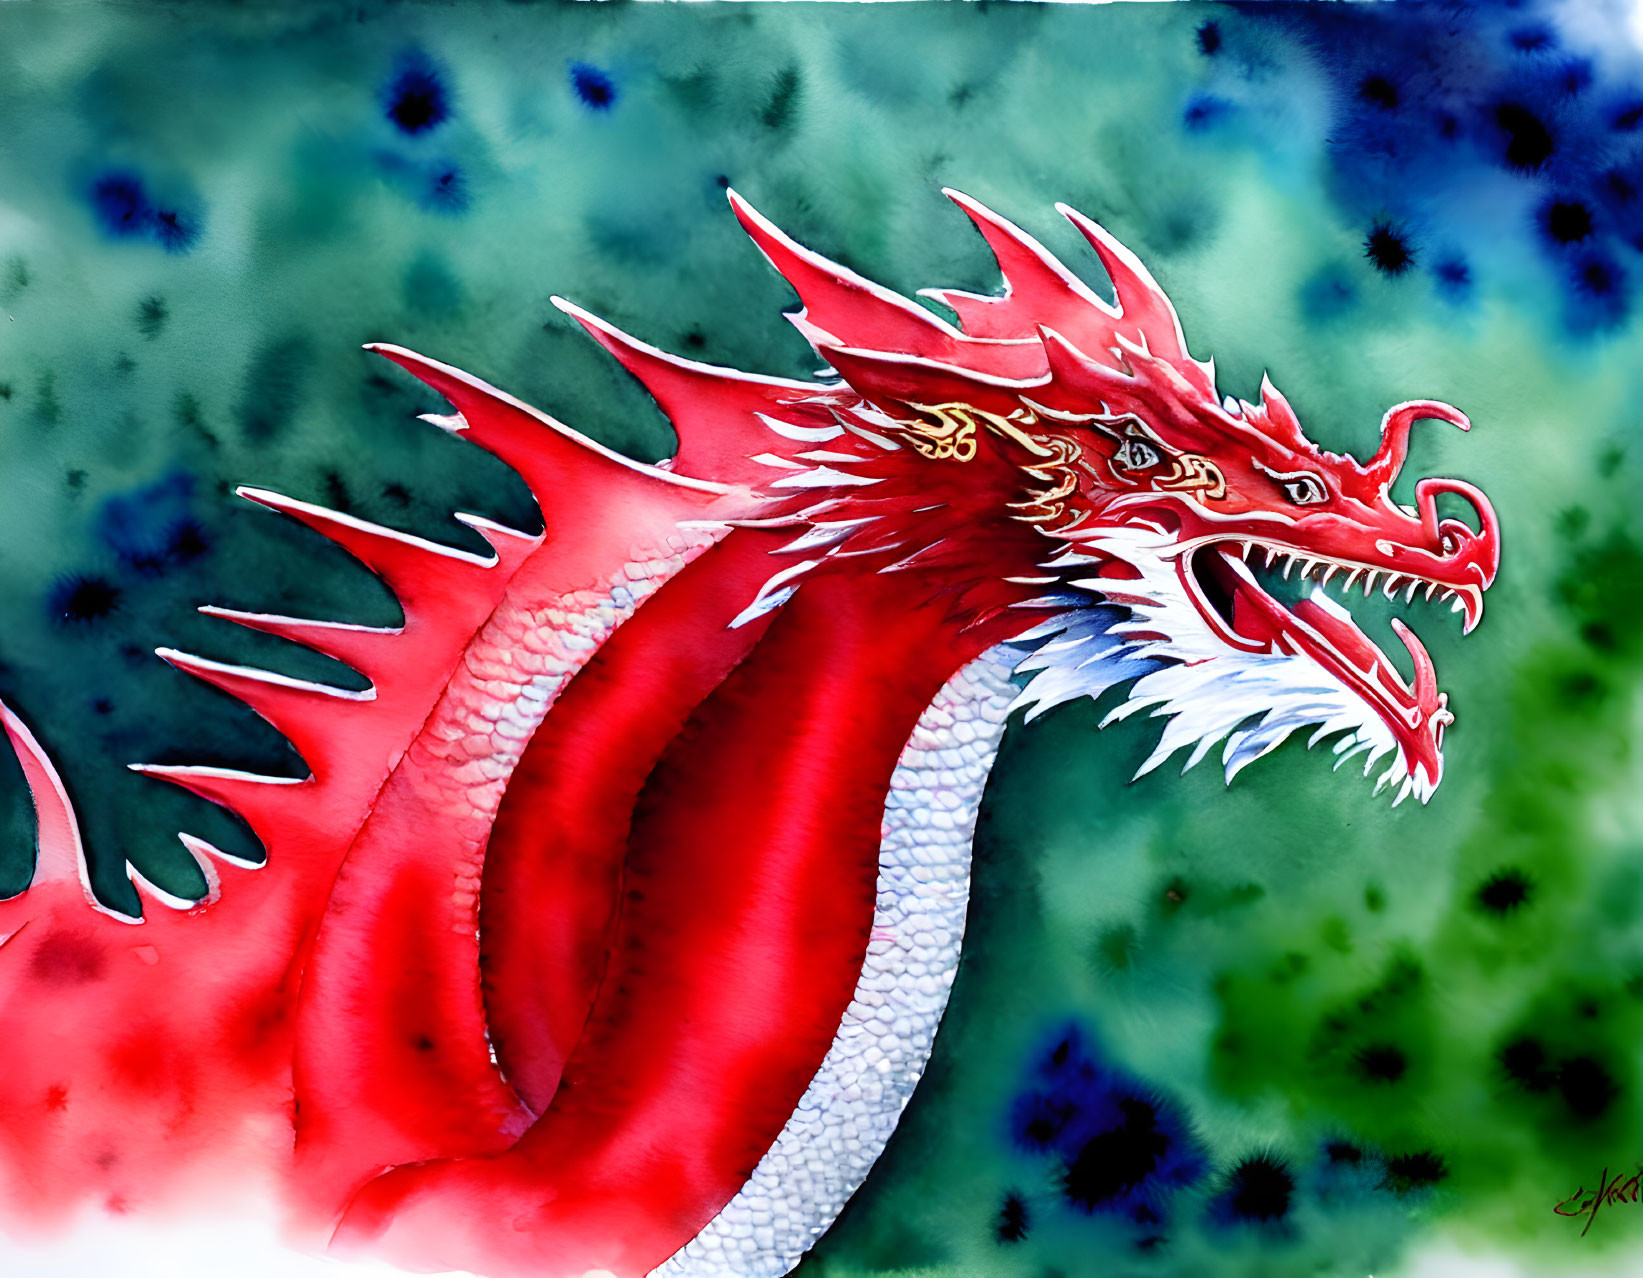 Detailed illustration of red dragon with fiery mane and intricate scales on mottled background